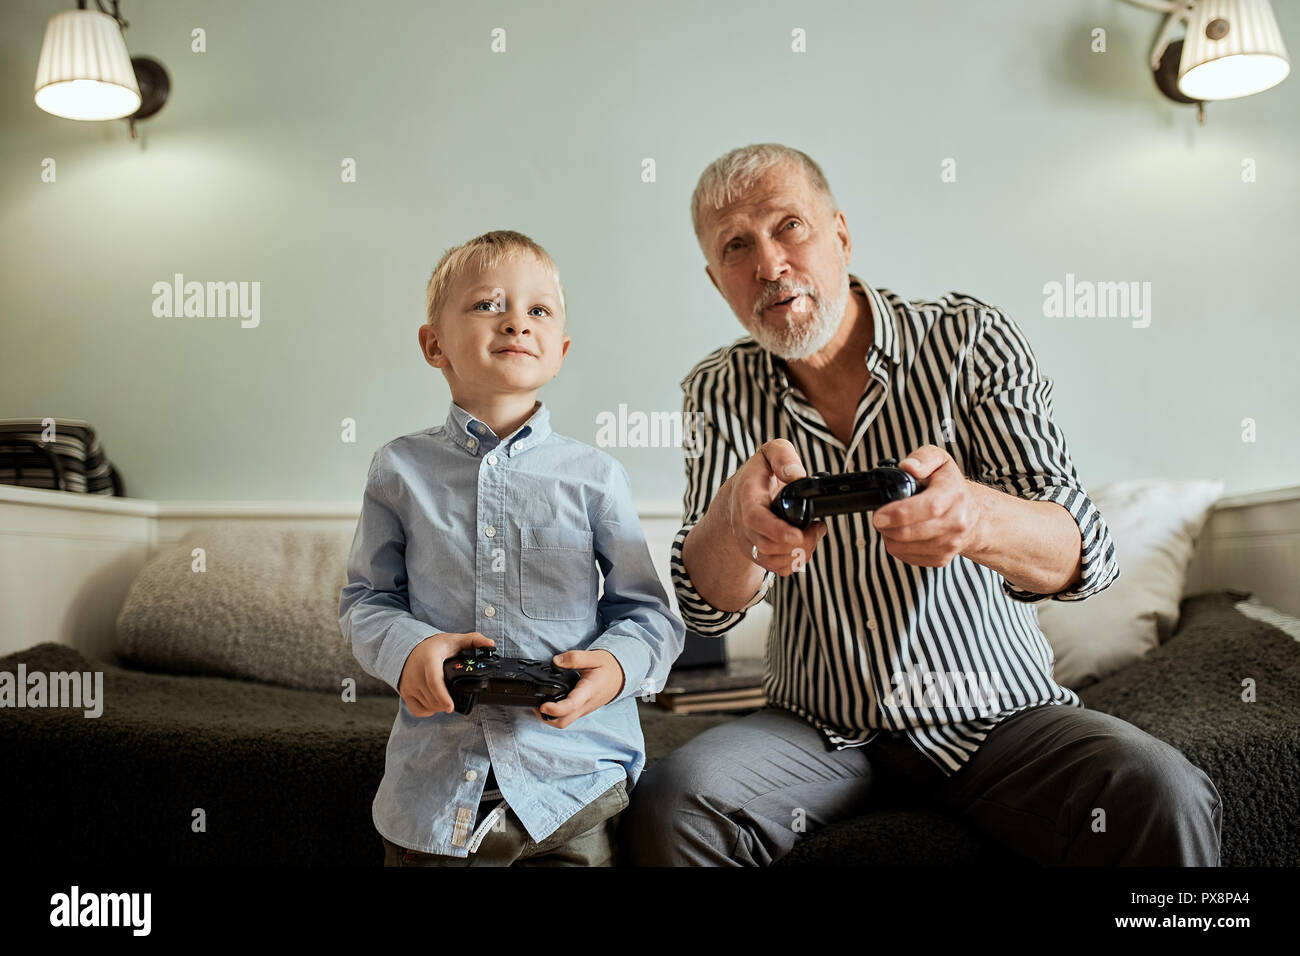 Grandfather and grandson playing video games on computer with joystick Stock Photo